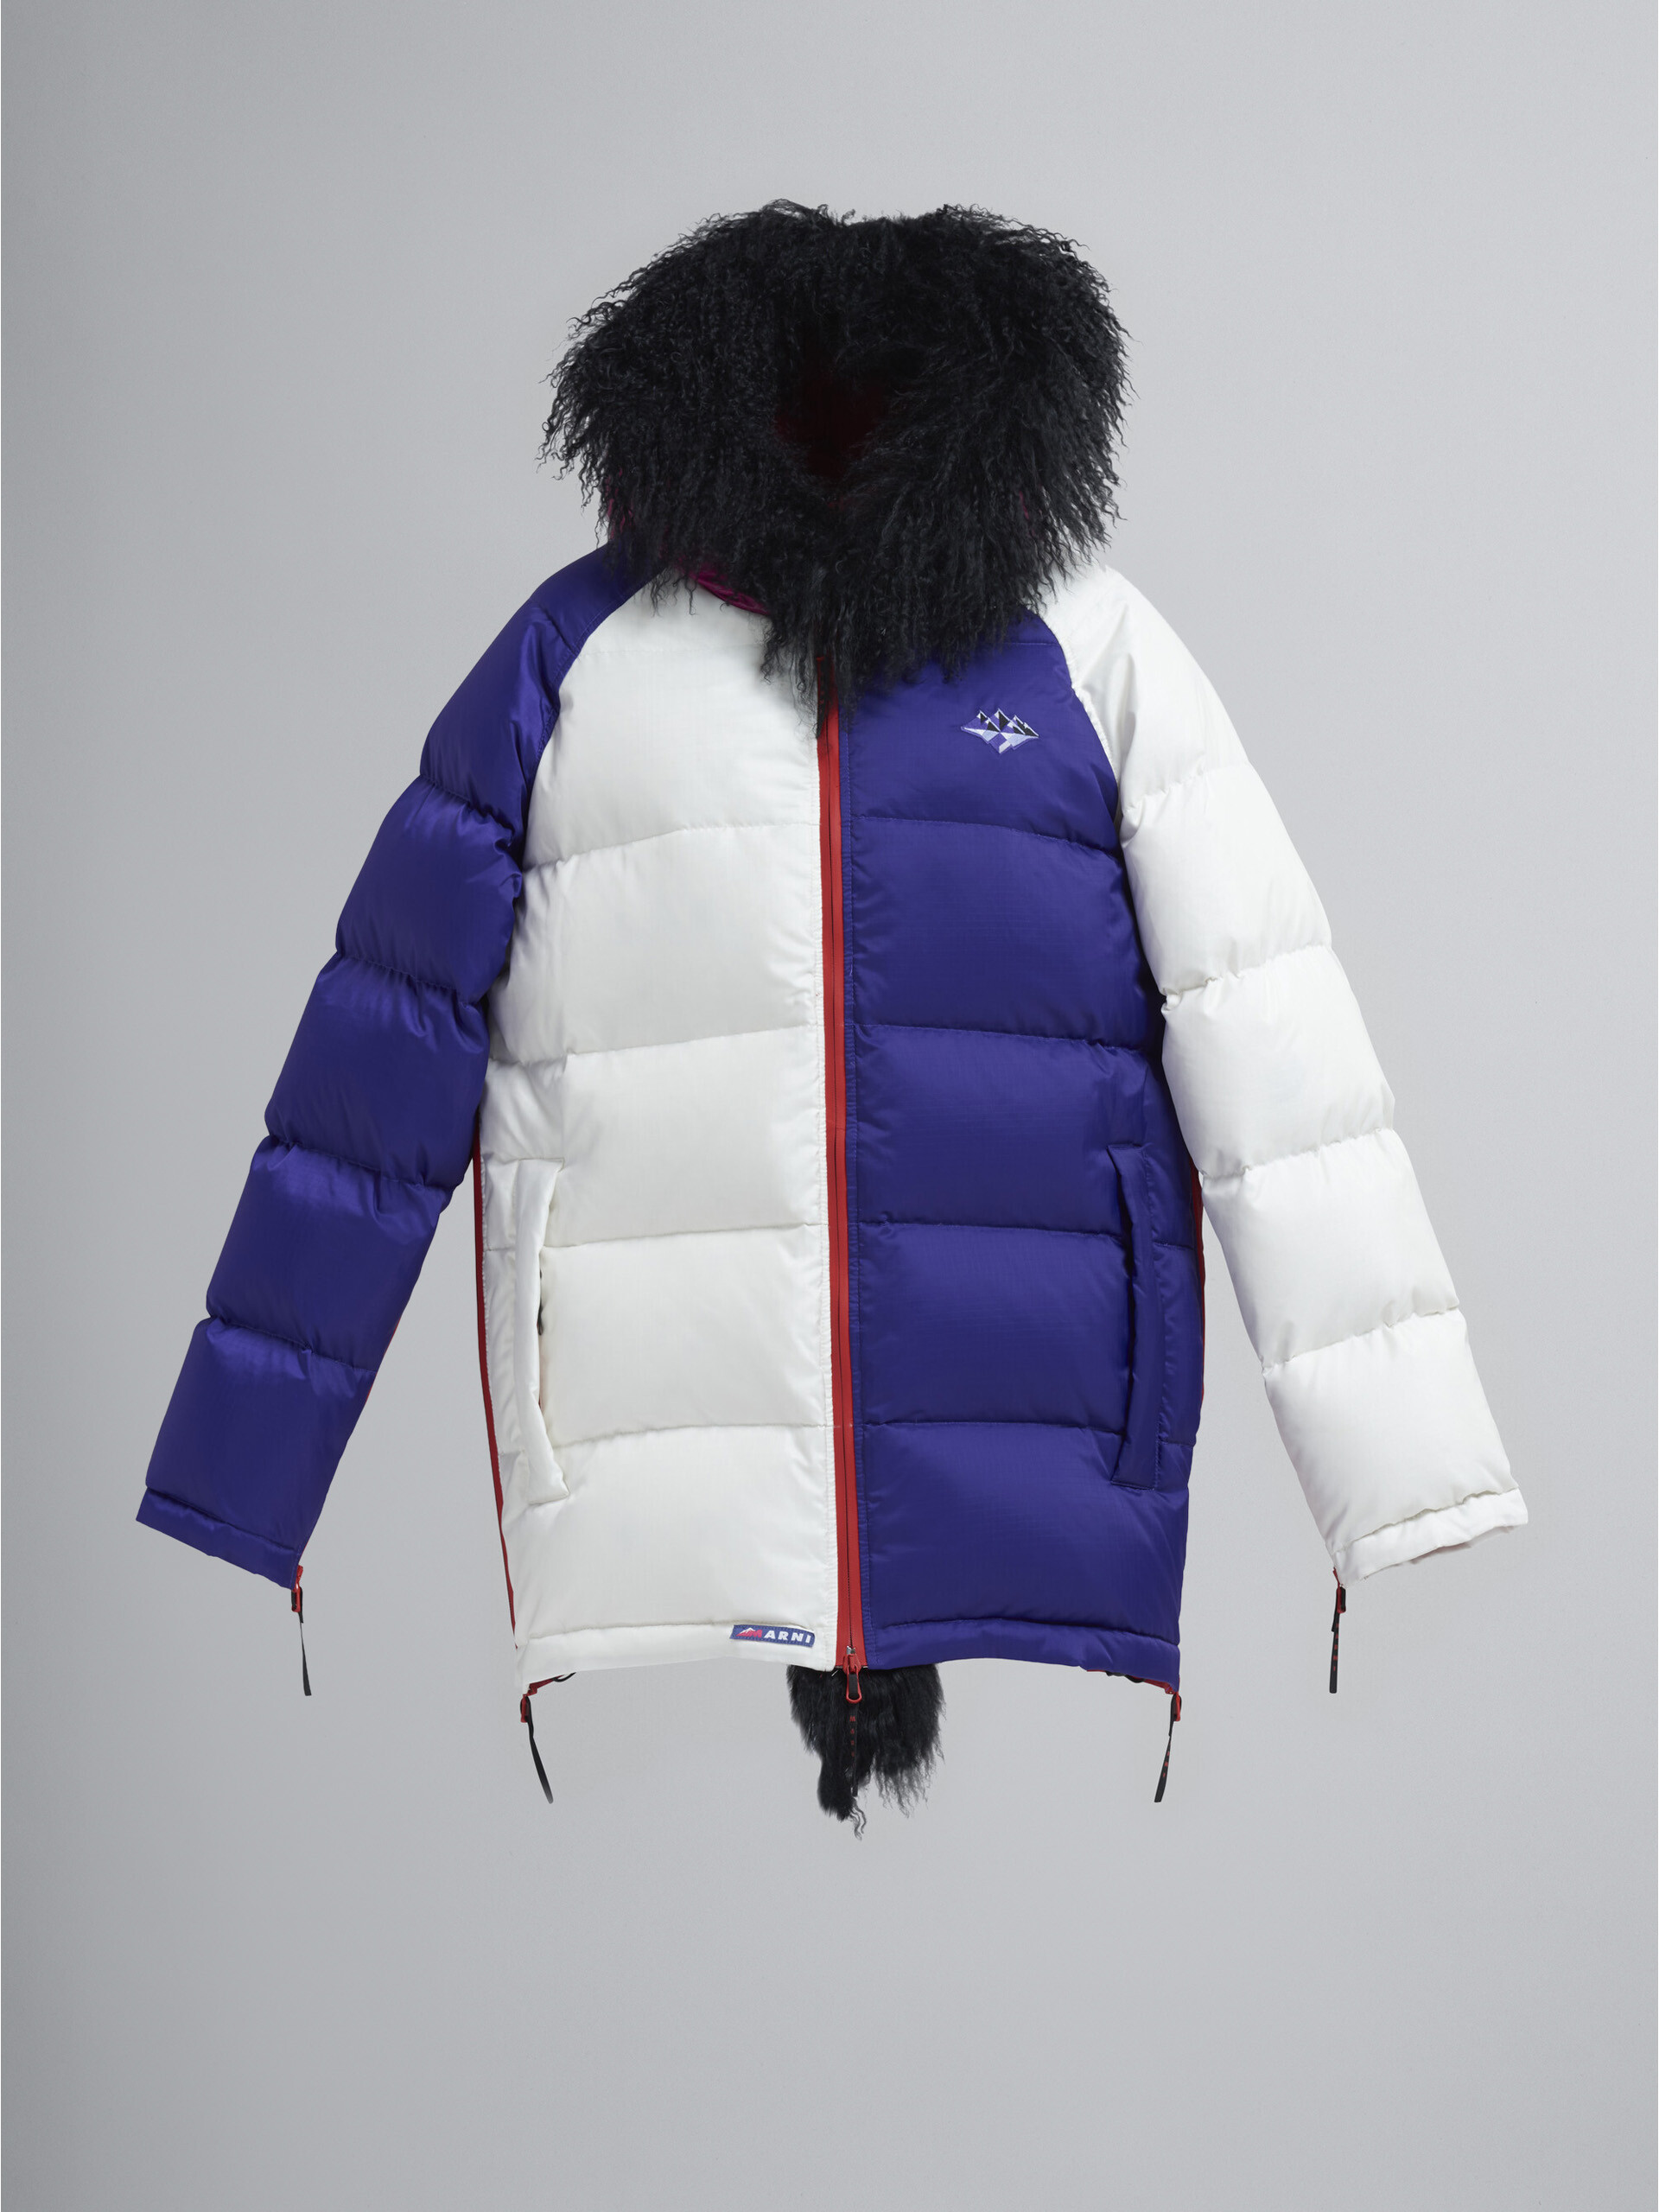 Down jacket in colour-block ripstop nylon - Winter jackets - Image 1